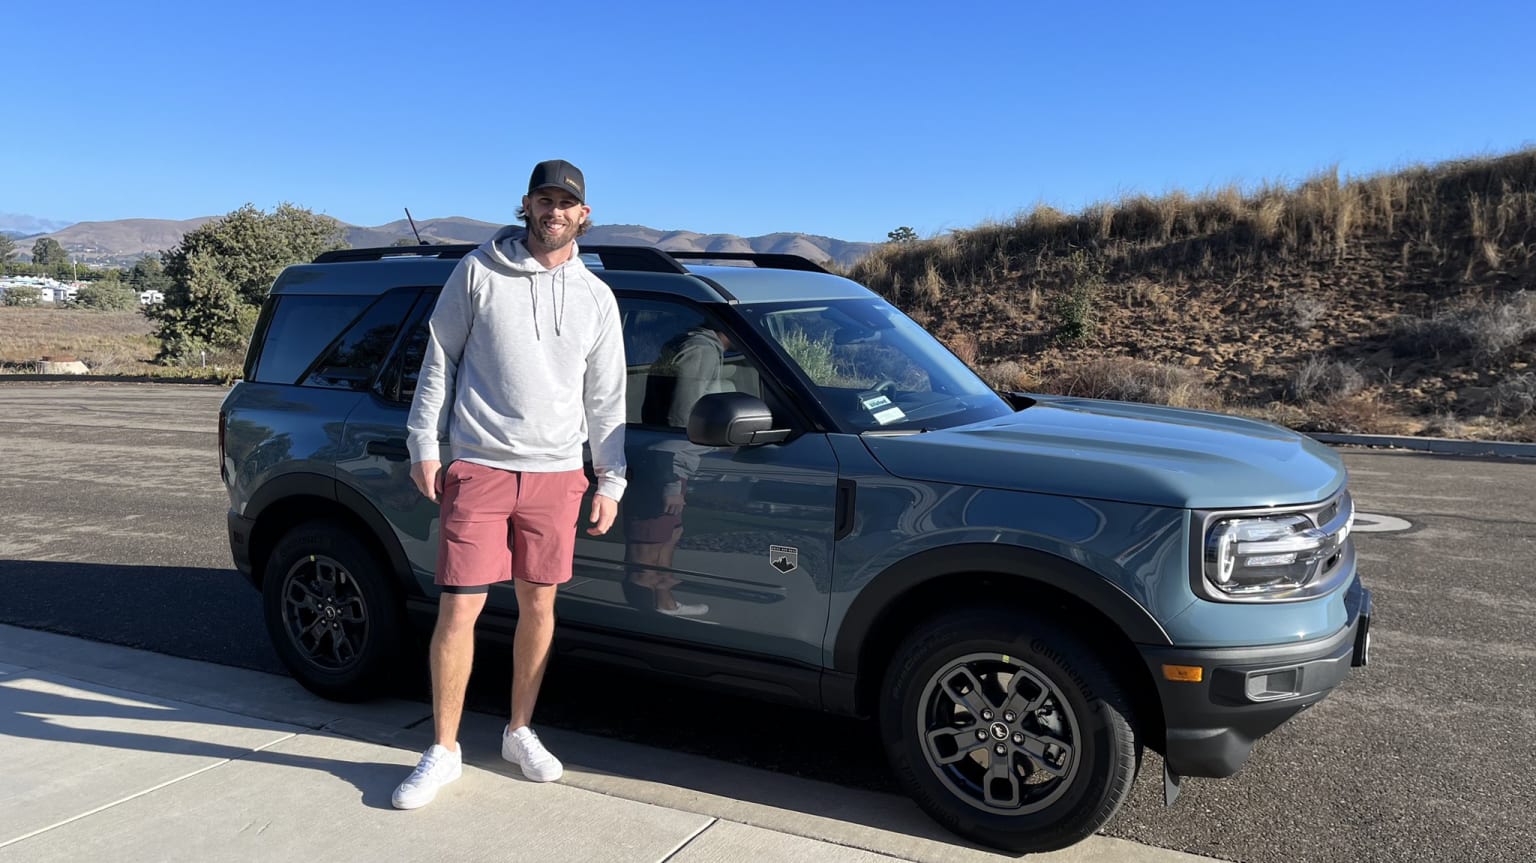 Jeff McNeil standing in front of the SUV bought for him by Francisco Lindor